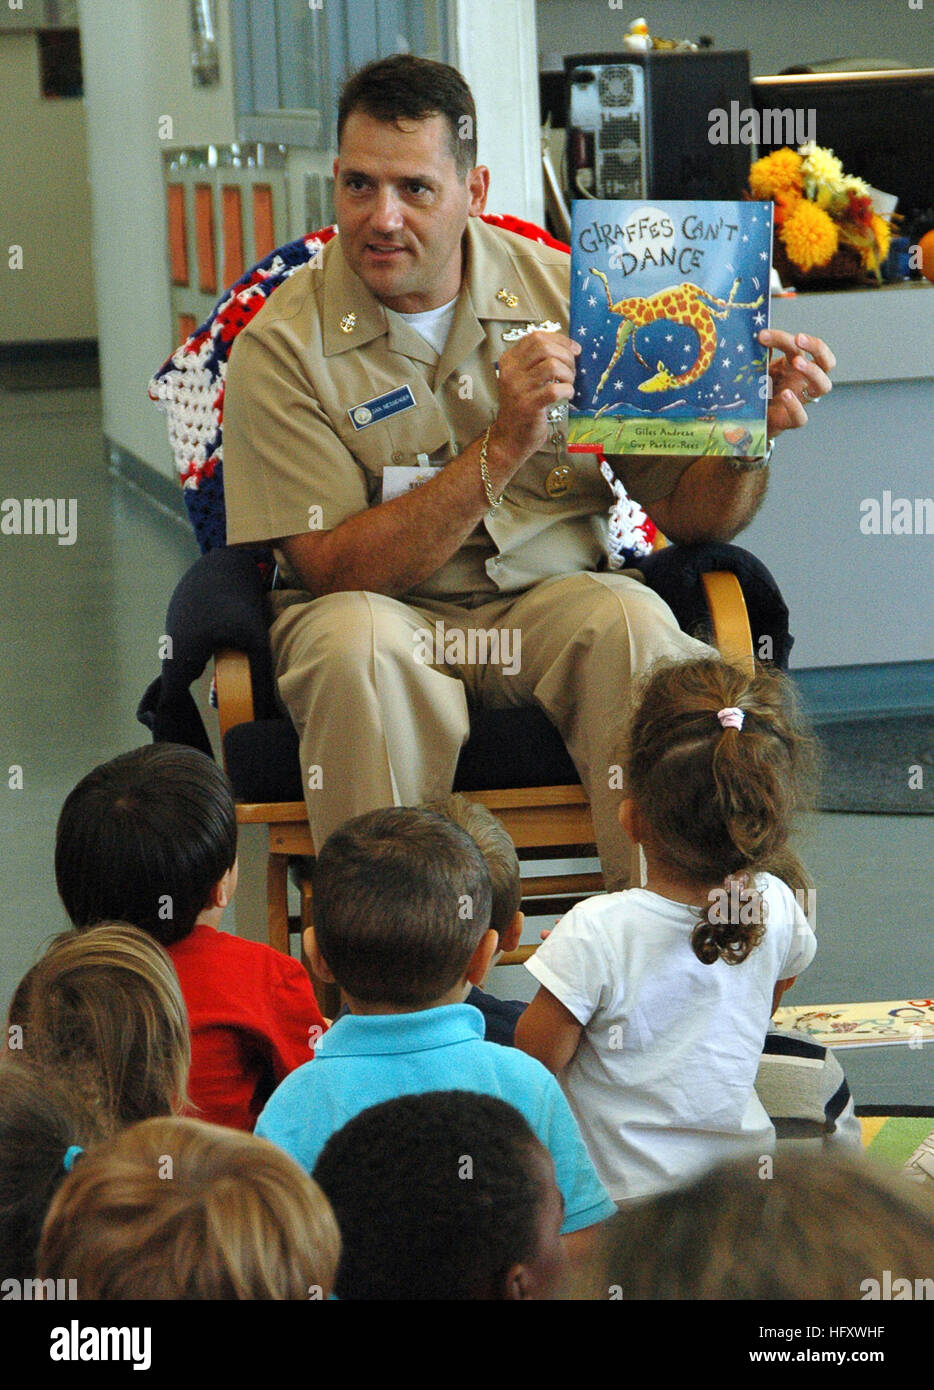 091026-N-0311M-001 KEY WEST, Fla. (Oct. 26, 2009) Naval Air Station Key West Command Master Chief Dan Messenger reads a book at the Naval Air Station Key West Child Development Center. The Child Development Center received a grant from the Early Learning Coalition Reading Program for three sets of books for children ages 0-5 to take home and read with their parents. (U.S. Navy photo by Mass Communication Specialist 2nd Class Rachel McMarr/Received) US Navy 091026-N-0311M-001 Naval Air Station Key West Command Master Chief Dan Messenger reads a book at the Naval Air Station Key West Child Devel Stock Photo